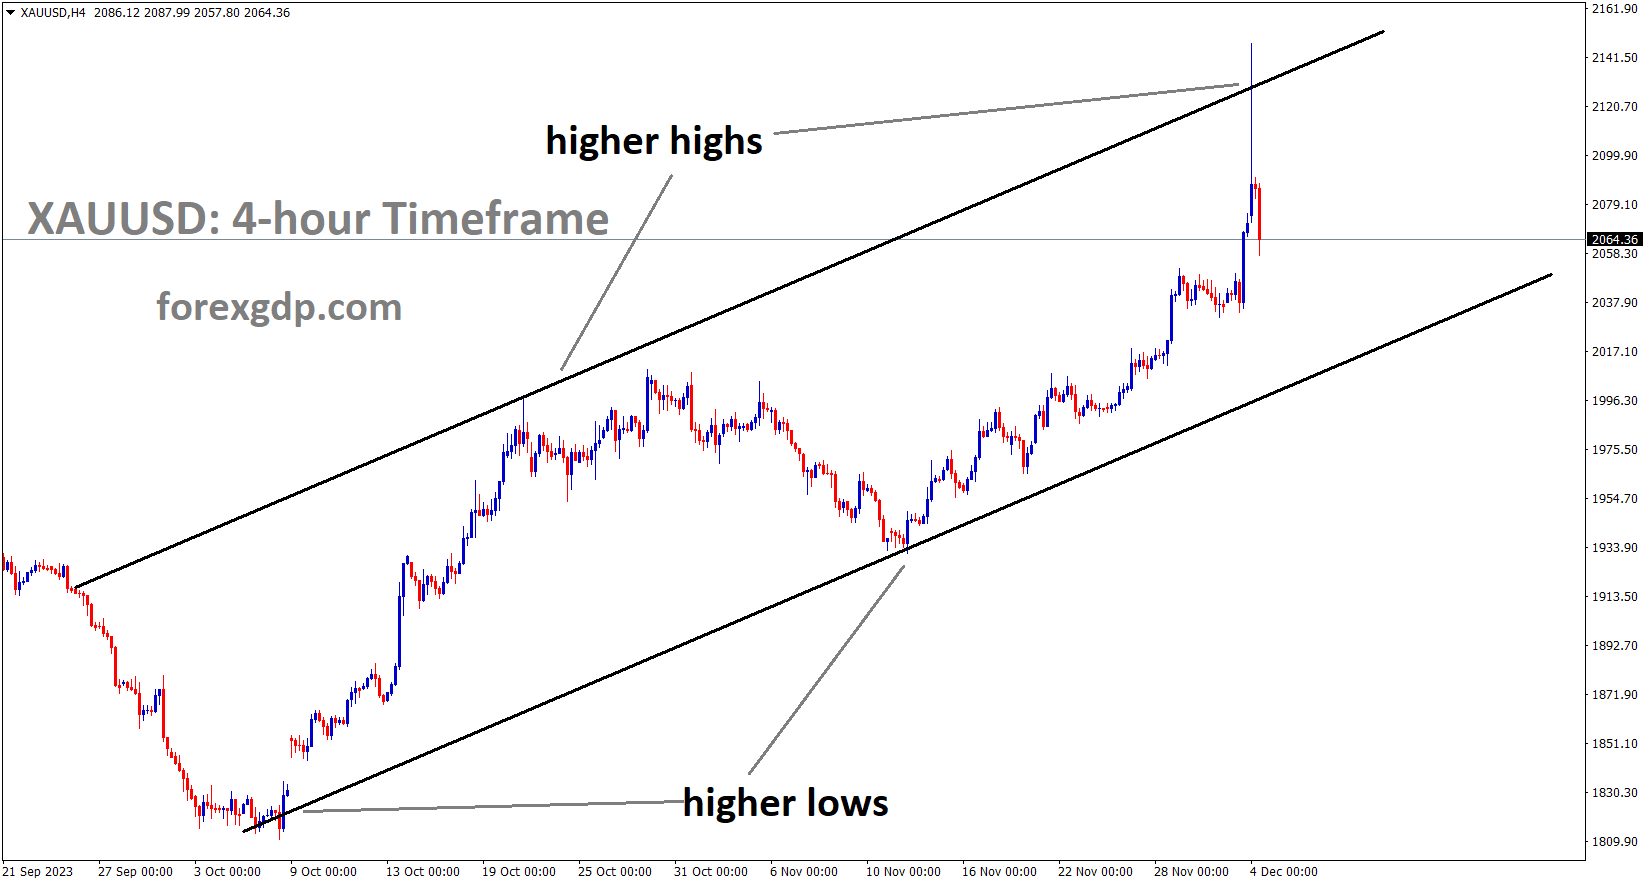 XAUUSD Gold price is moving in an Ascending channel and the market has fallen from the higher high area of the channel